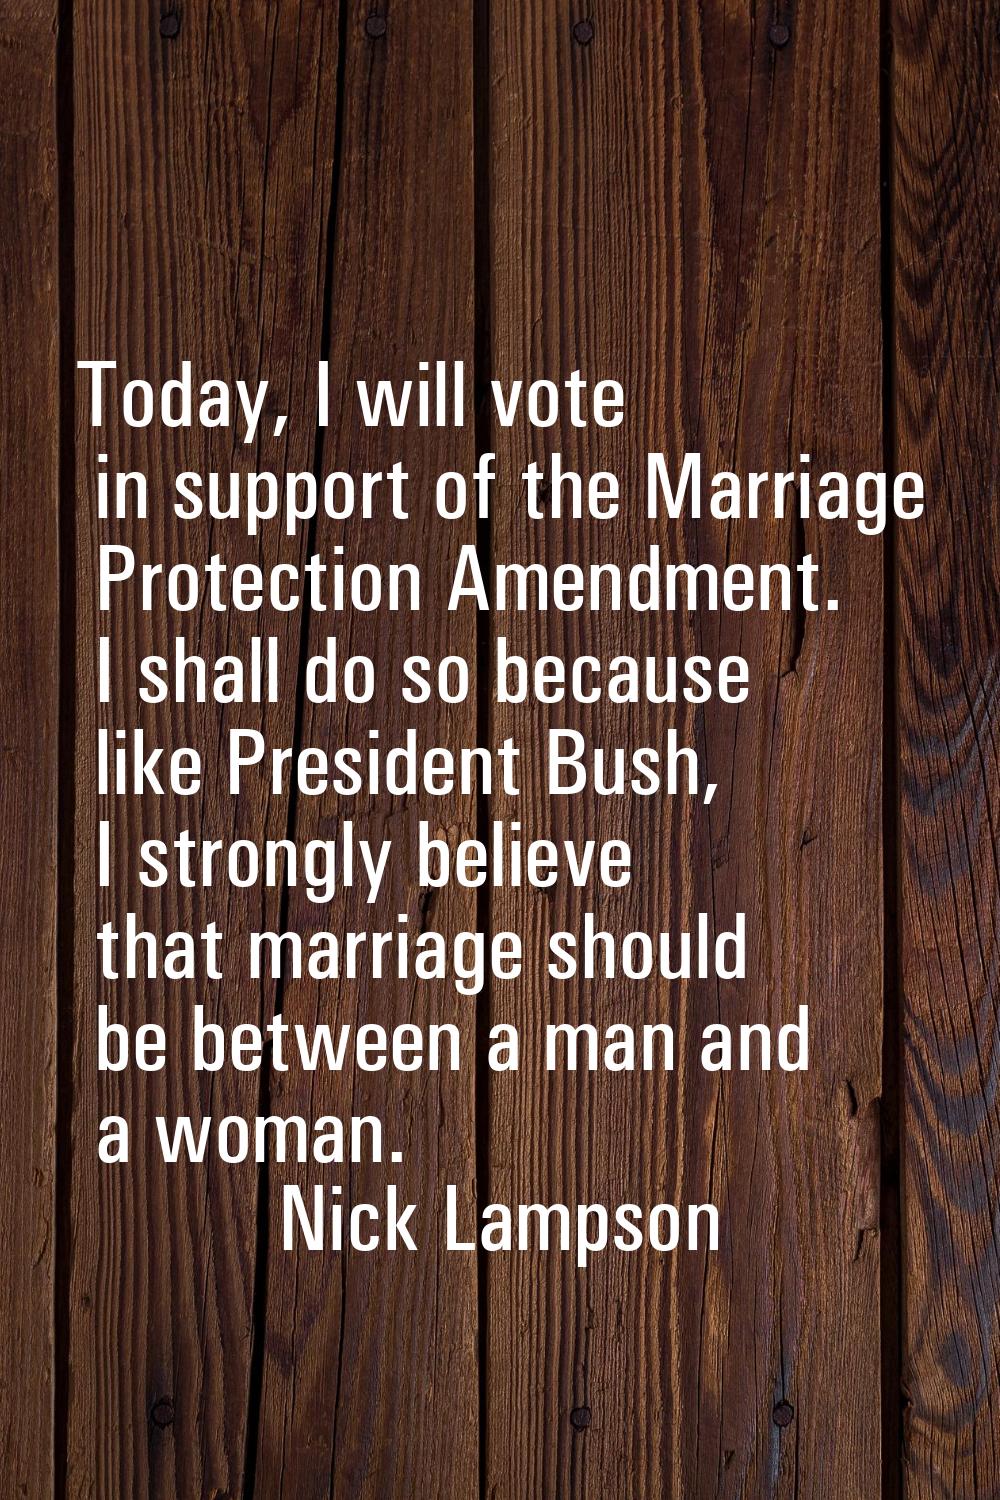 Today, I will vote in support of the Marriage Protection Amendment. I shall do so because like Pres